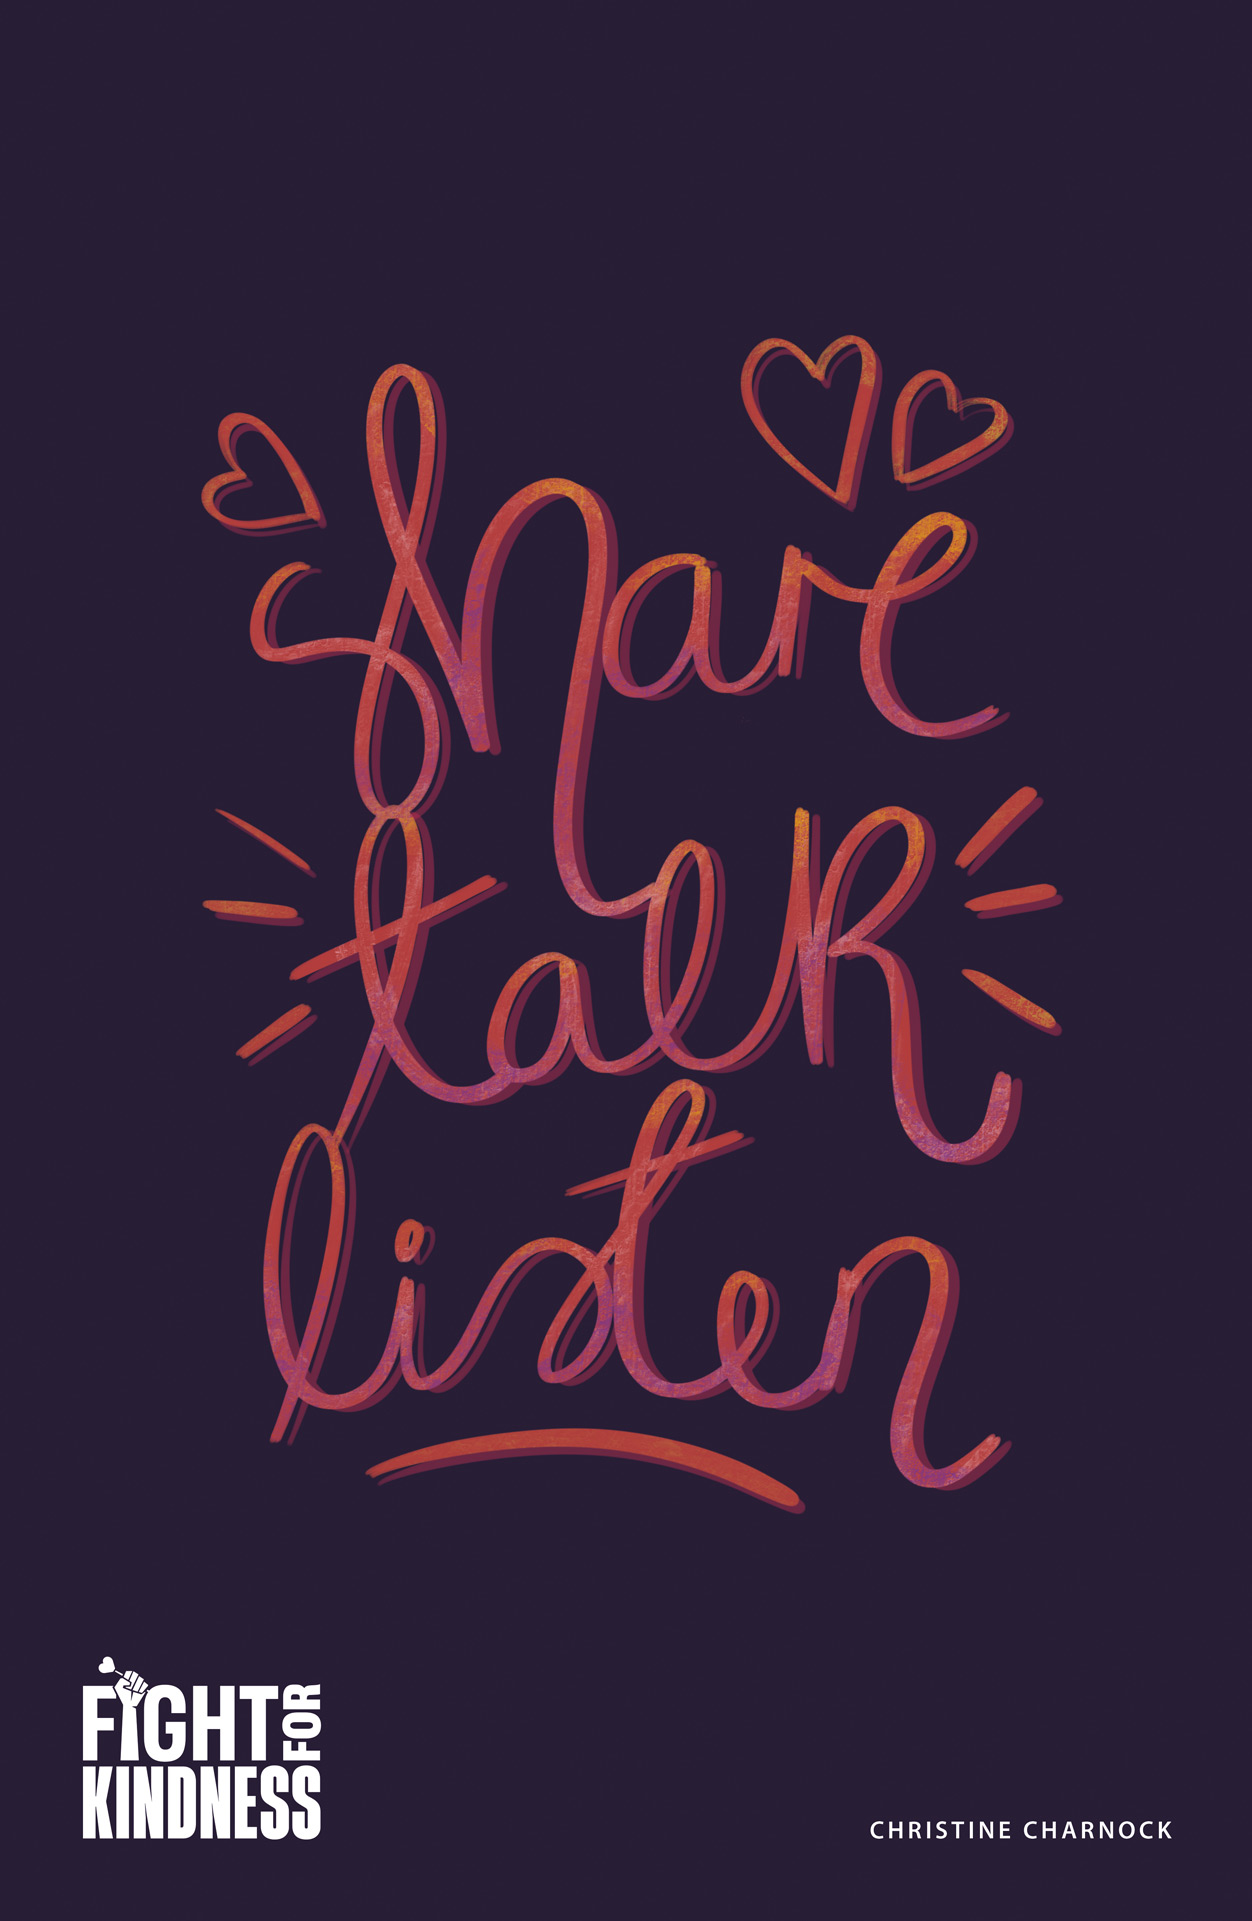 Illustration featuring the words 'Share, Talk, Listen' in lively hand-drawn lettering. The lettering uses a blend of colours, including shades of pink, purple, and yellow against a dark blue background.